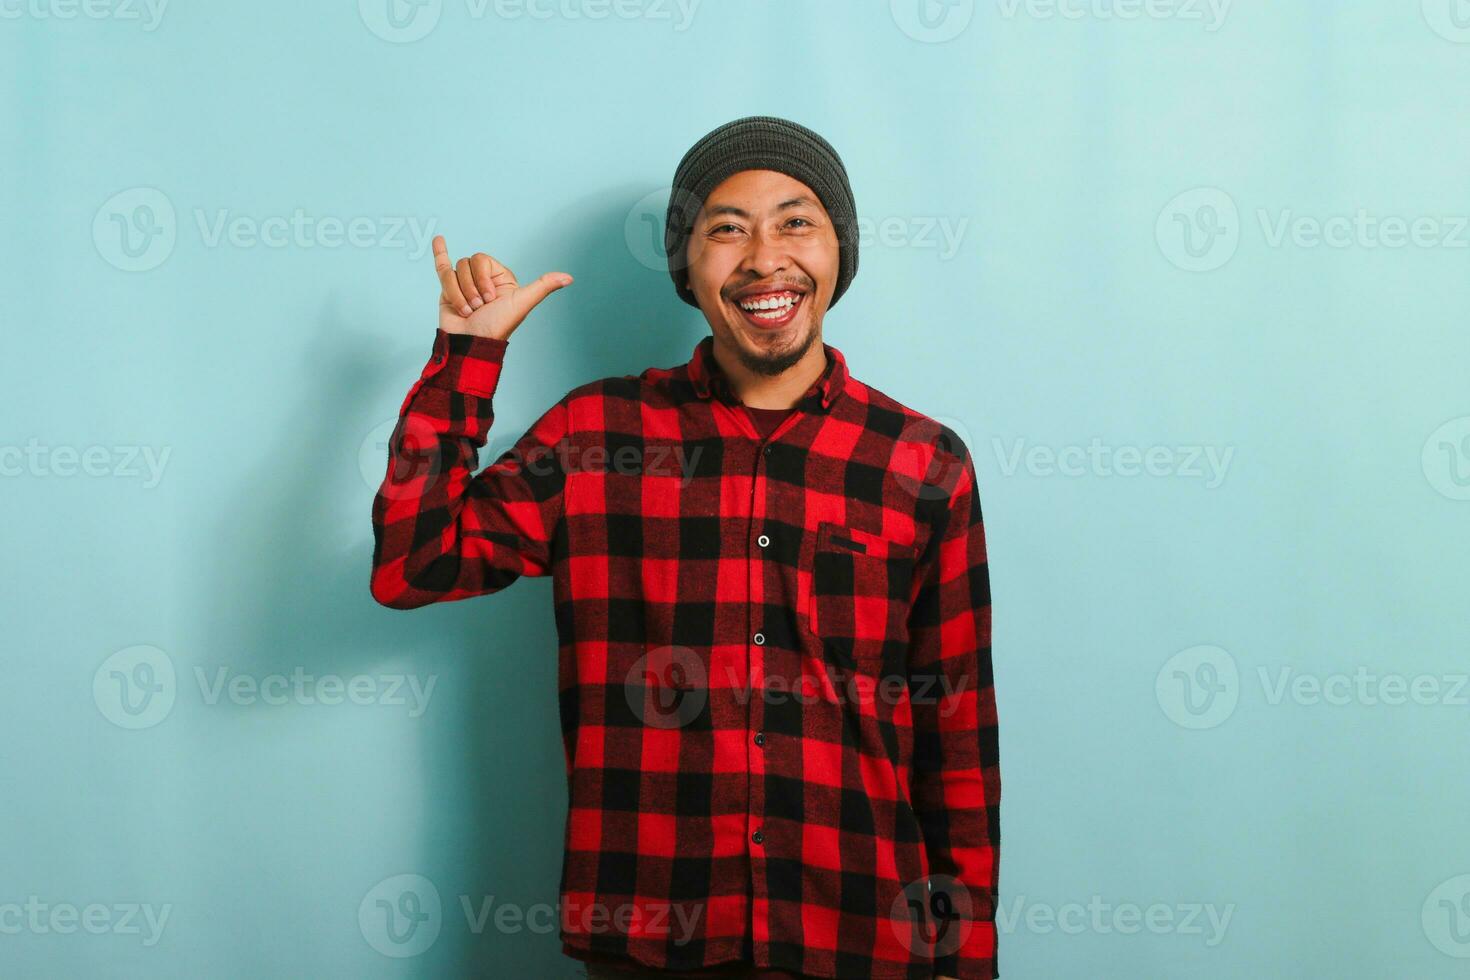 Happy young Asian man with a beanie hat and red plaid flannel shirt showing the rock and roll gesture with his fingers, expressing love for heavy metal music, isolated on a blue background photo